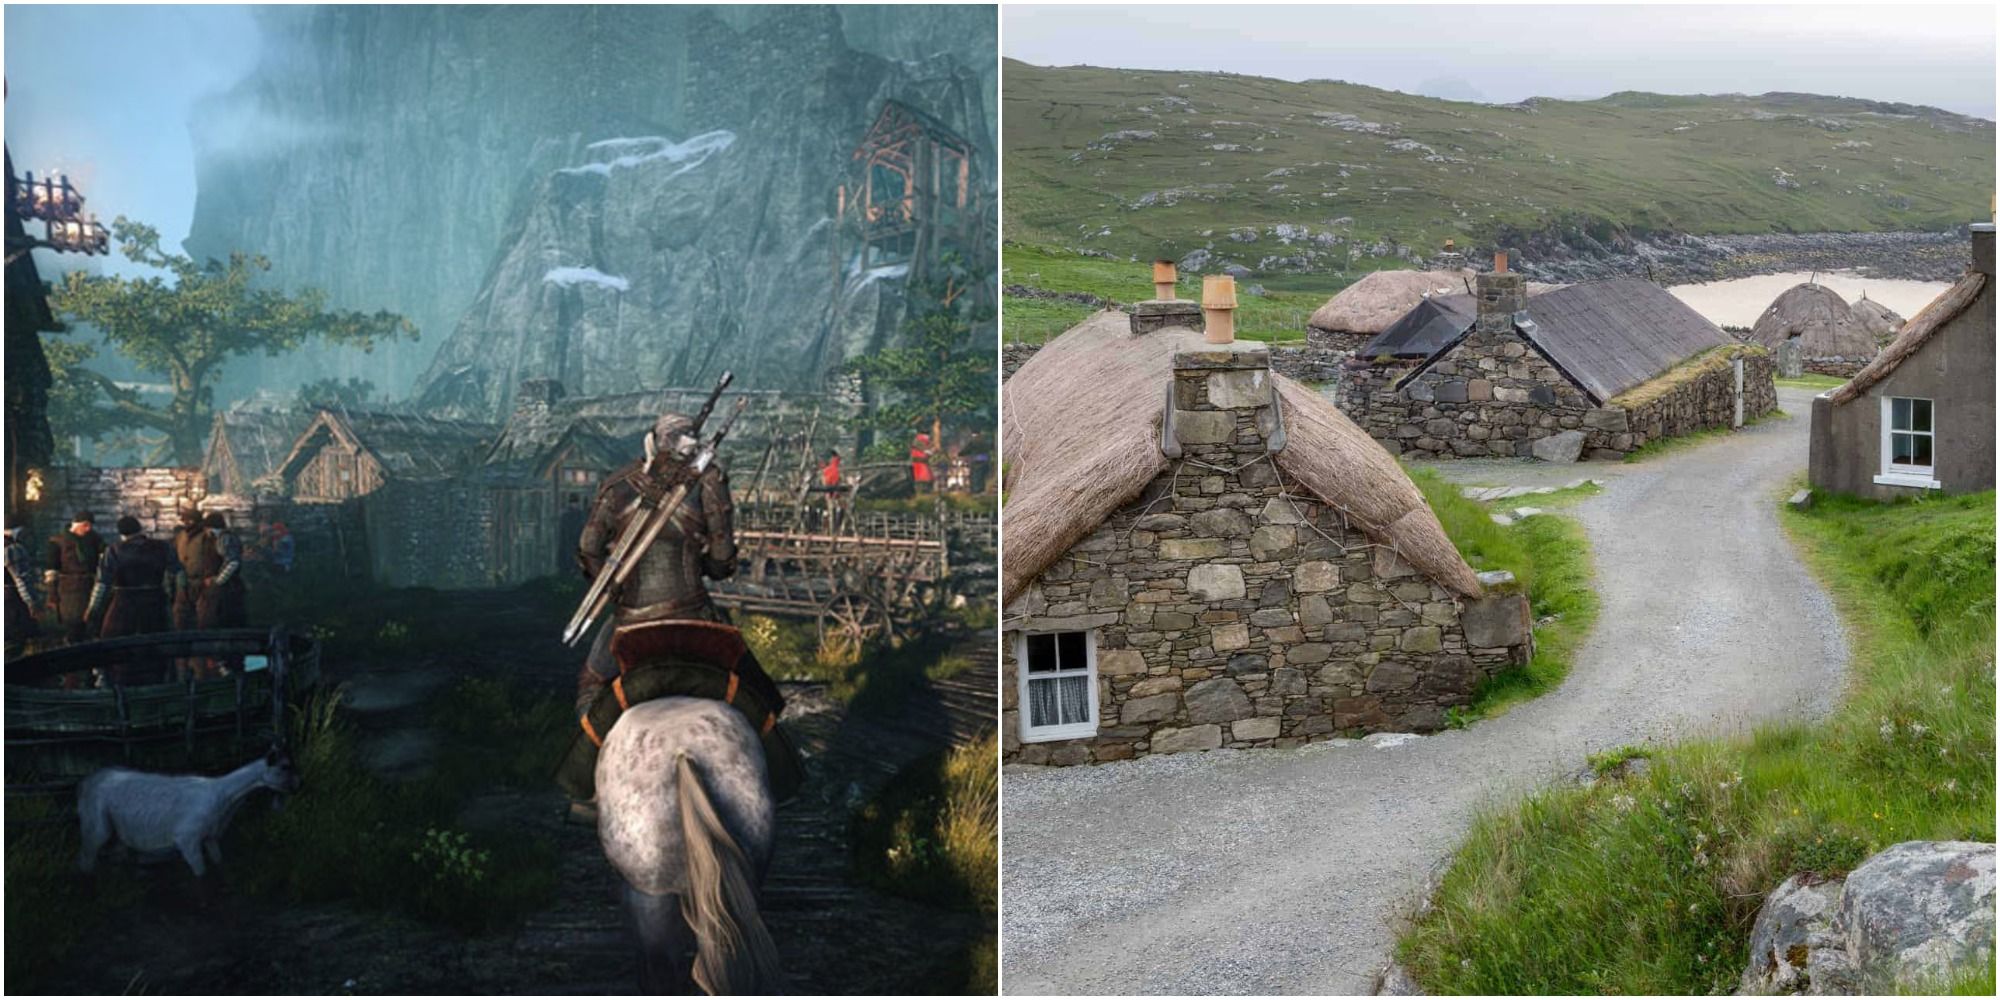 Geralt riding through a town of Skellige and stonehouse of the Hebrides of Scotland